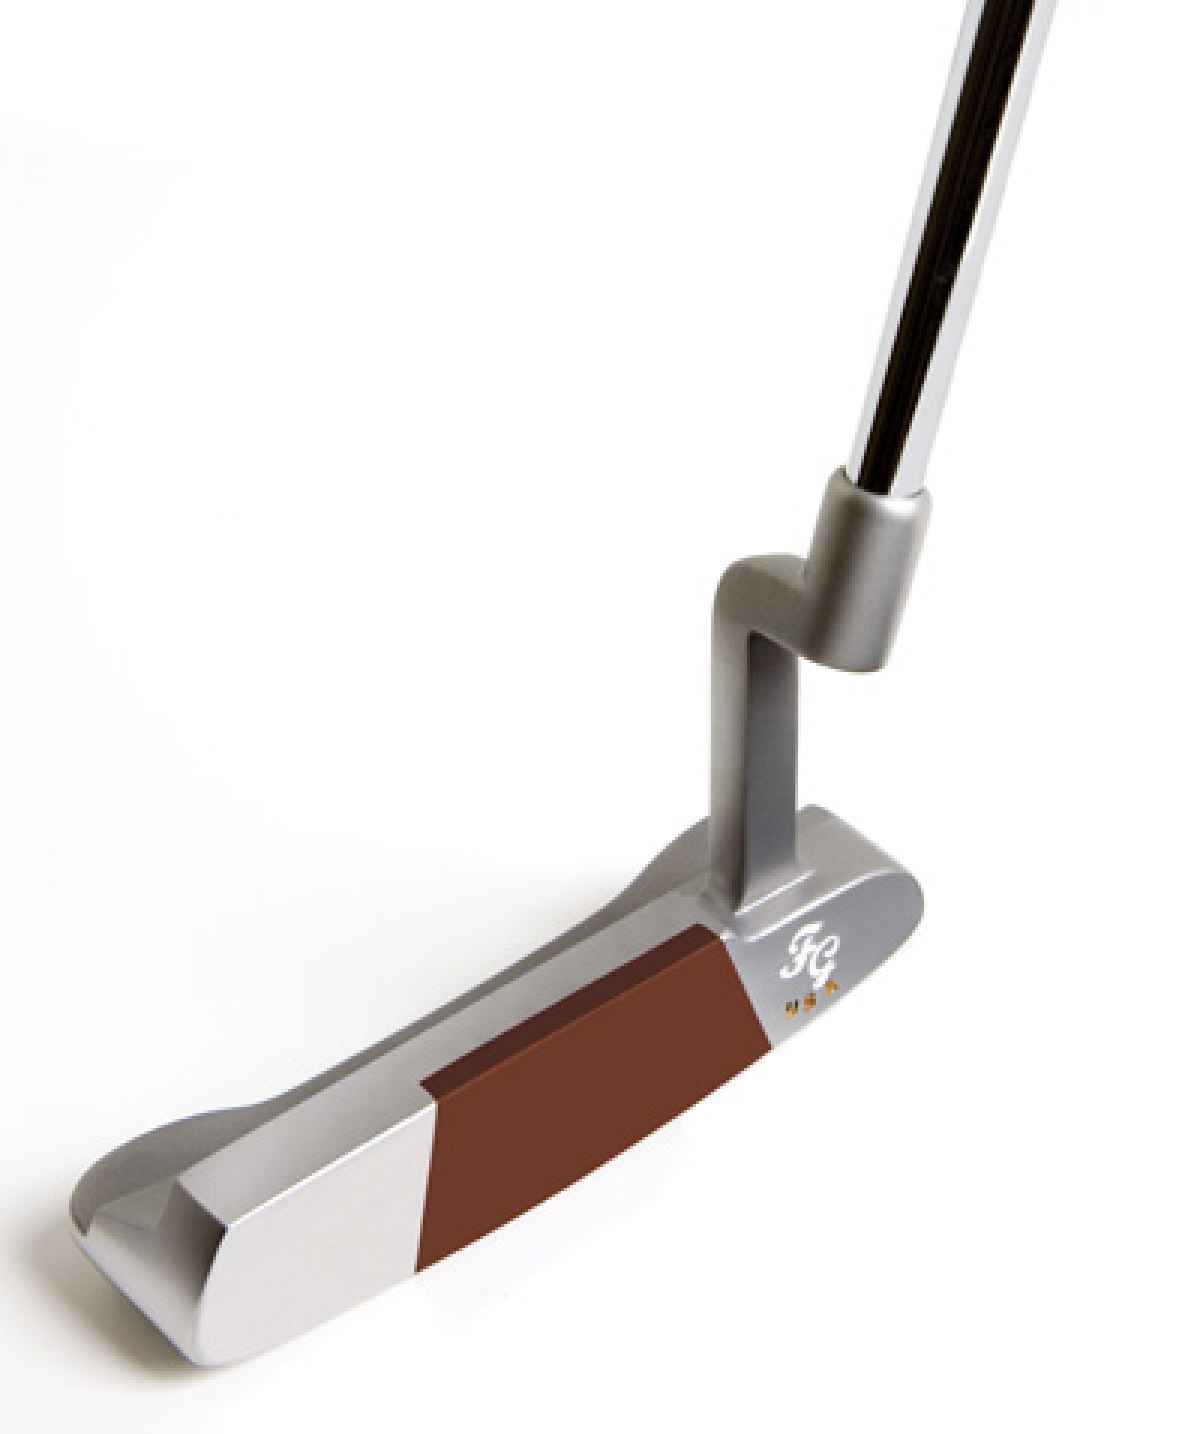 Fisher Golf putters move on UK market